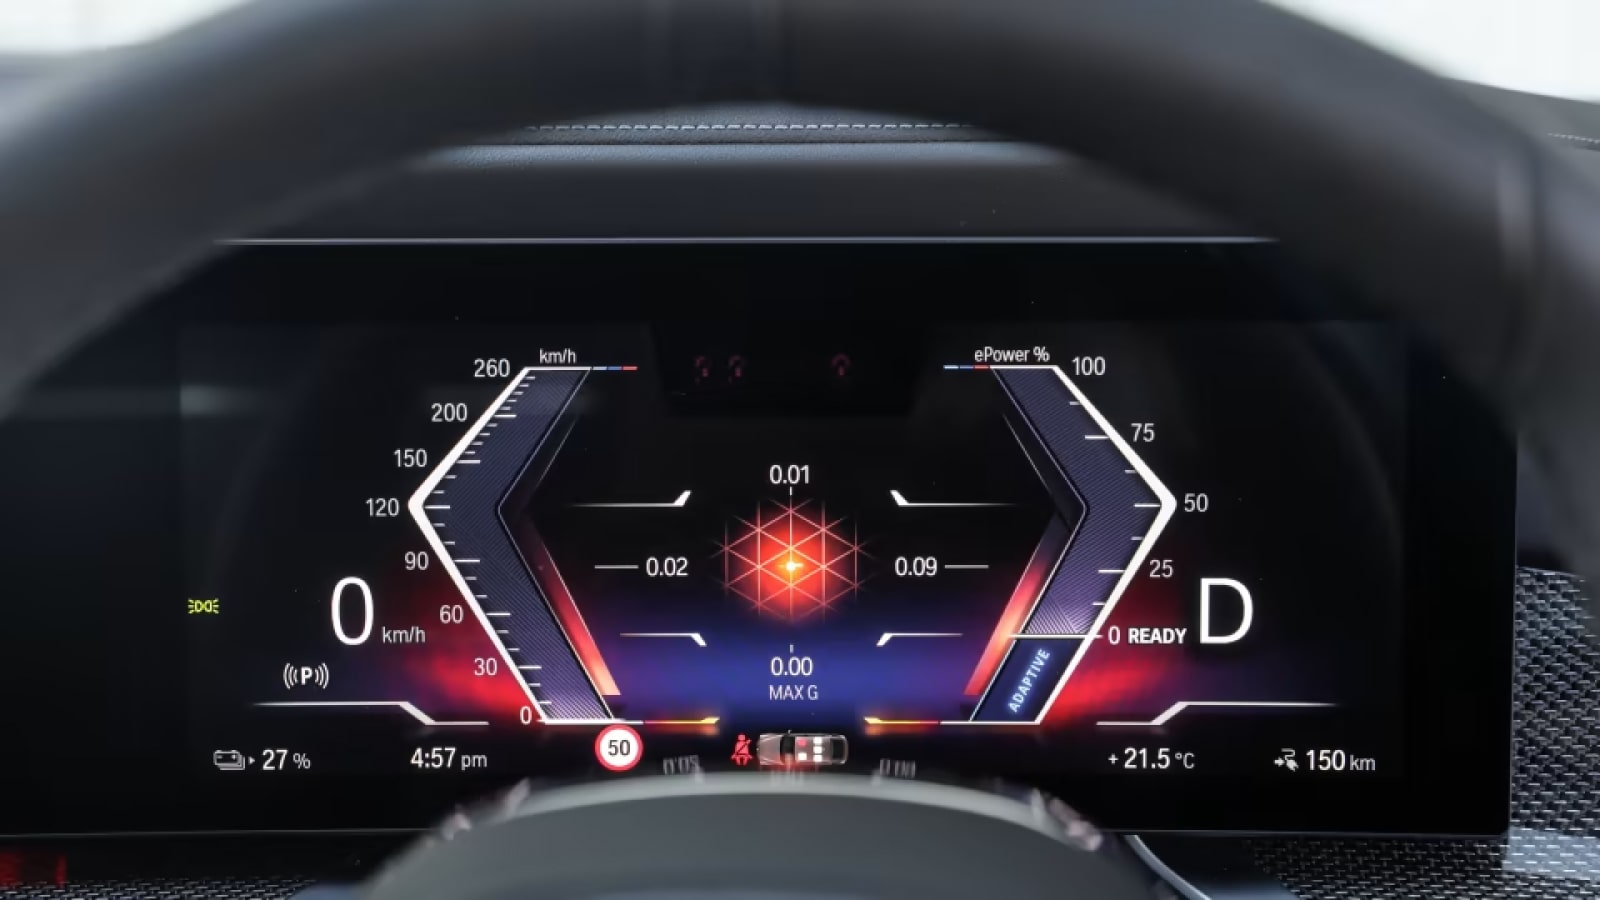 BMW i7 driver interface - sport mode showing G-Force